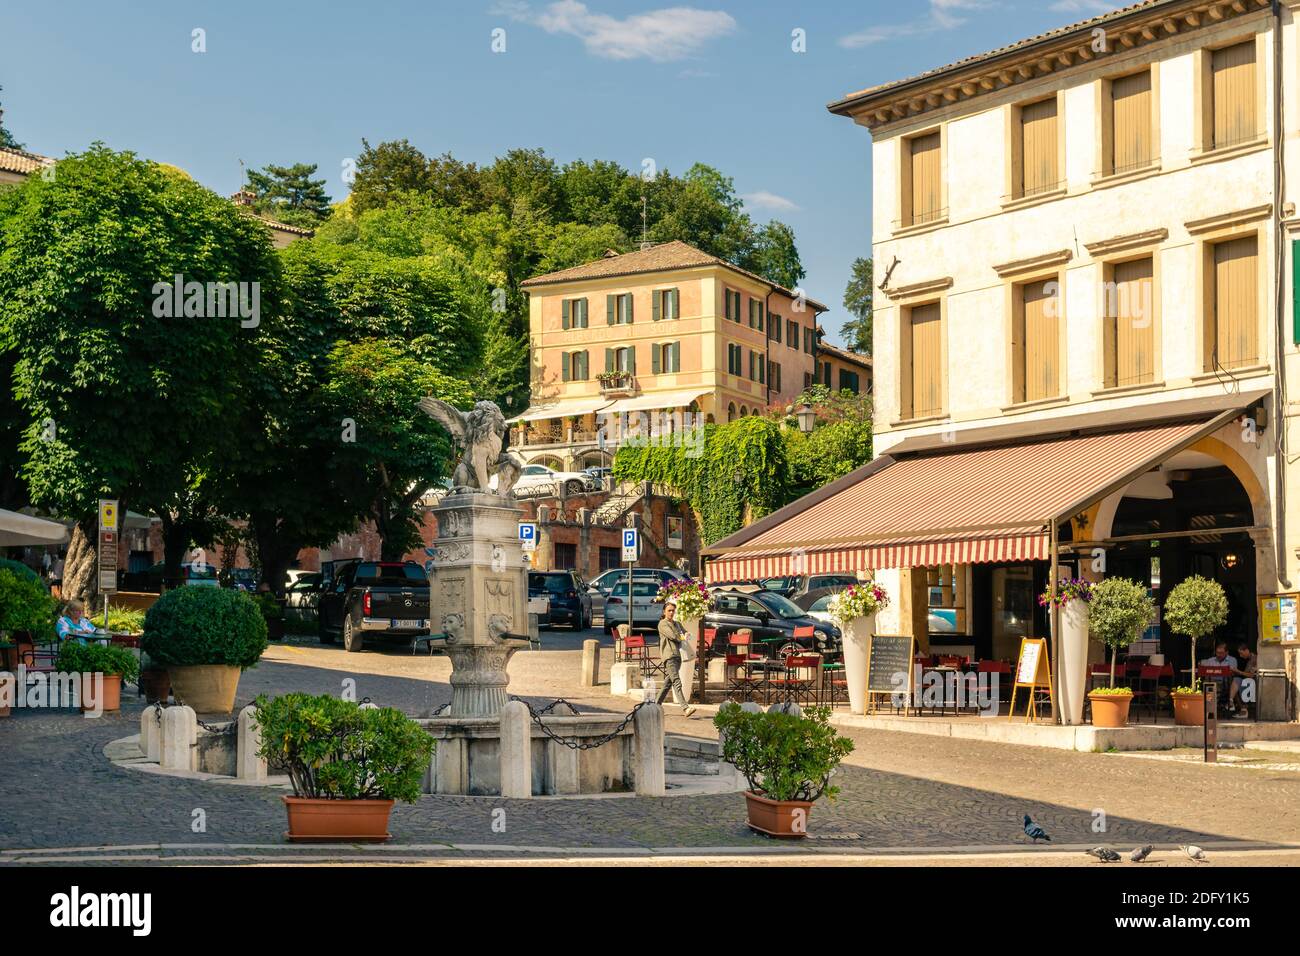 View of the main square of the ancient village of Asolo in summer, Treviso, Italy Stock Photo